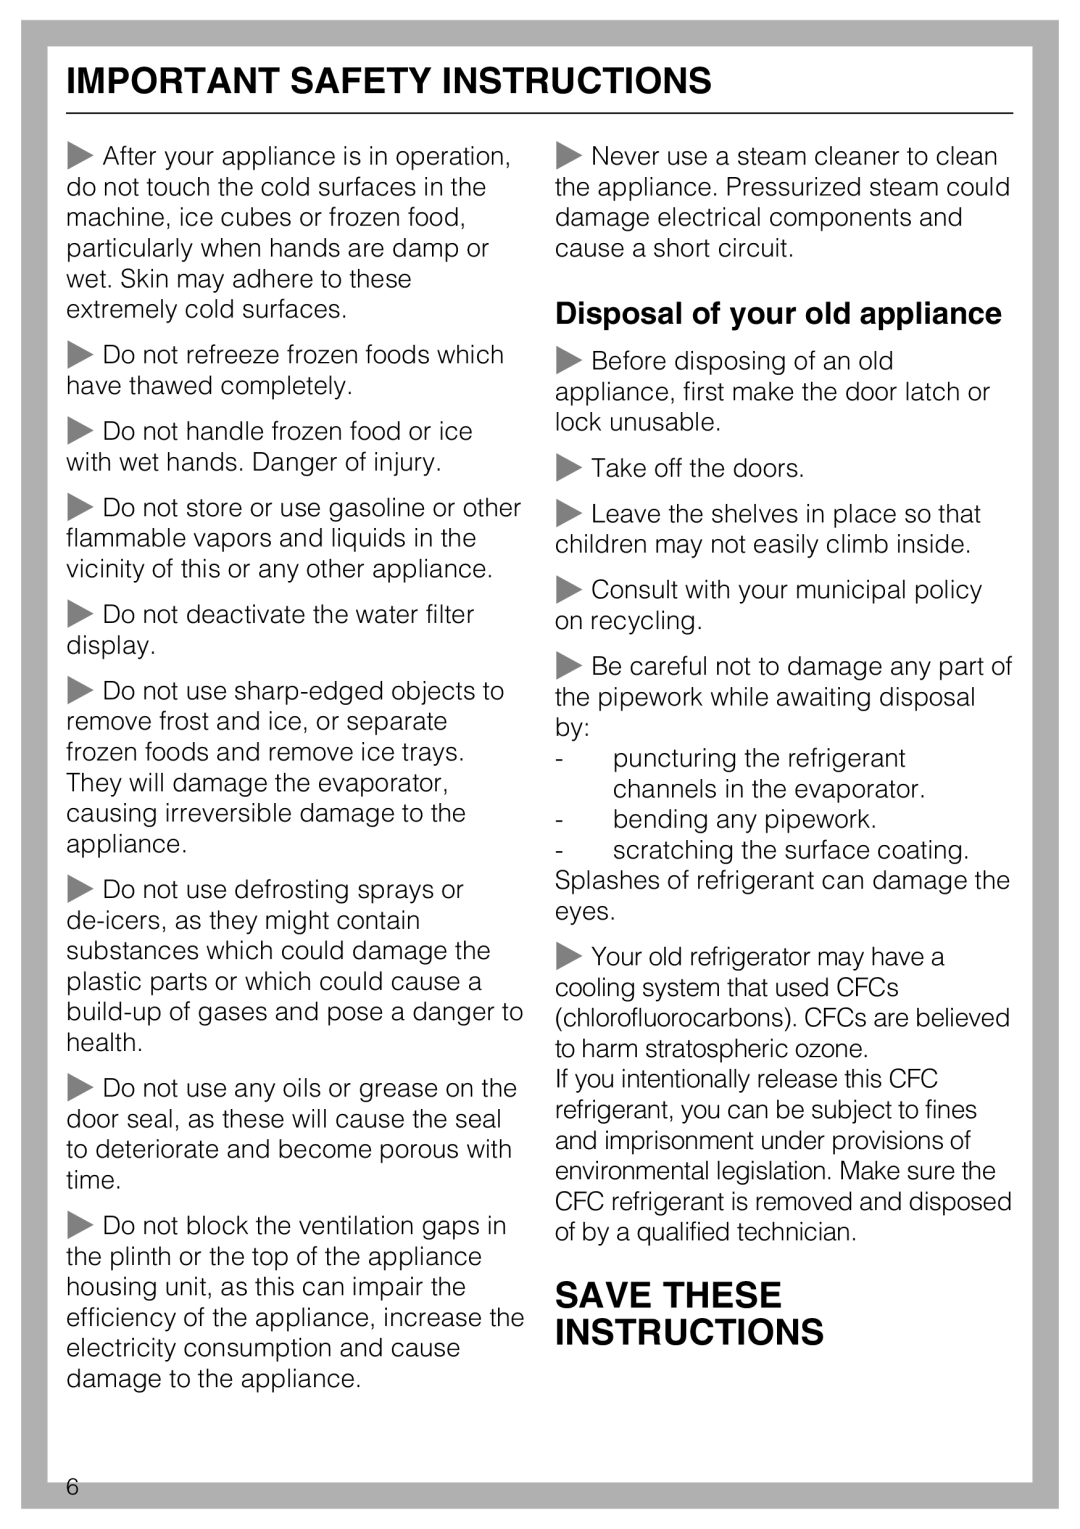 Miele KF 1811 SF, KF 1911 SF Save These Instructions, Disposal of your old appliance, Important Safety Instructions 